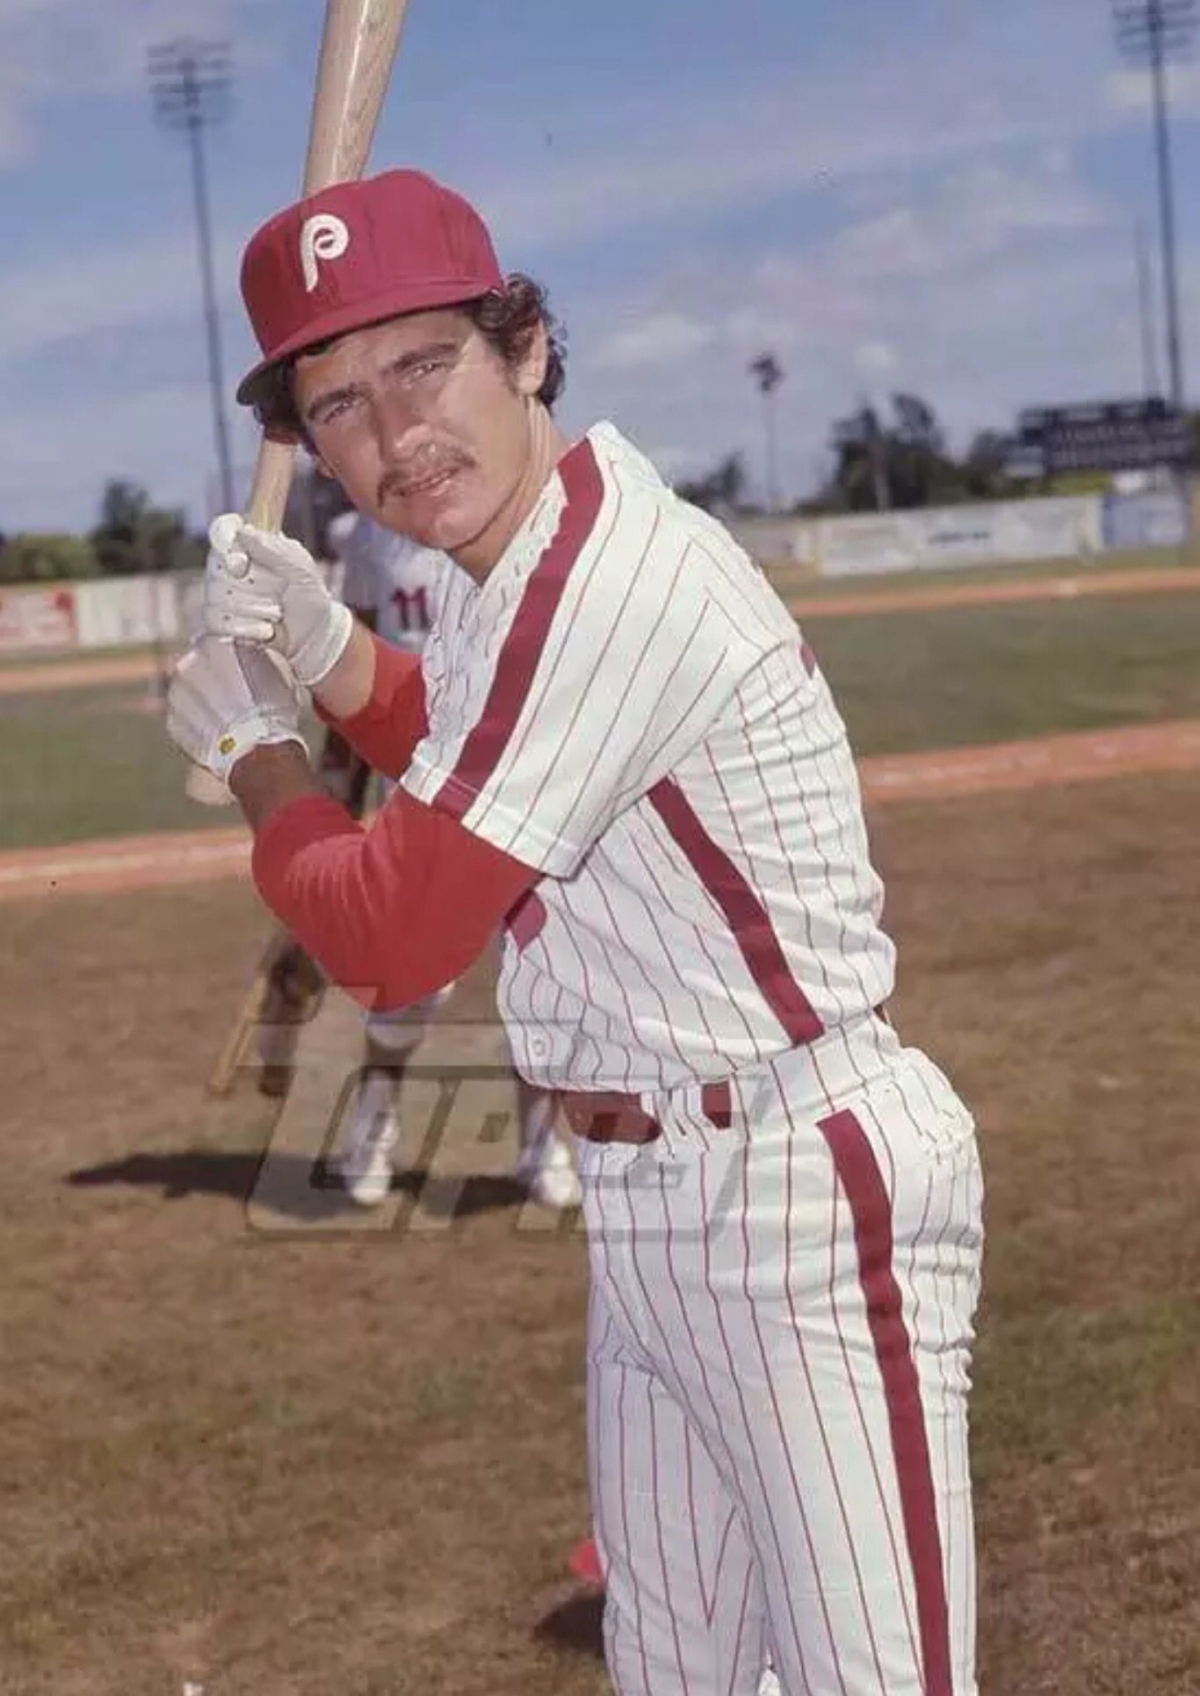 Not in Hall of Fame - 29. Larry Bowa